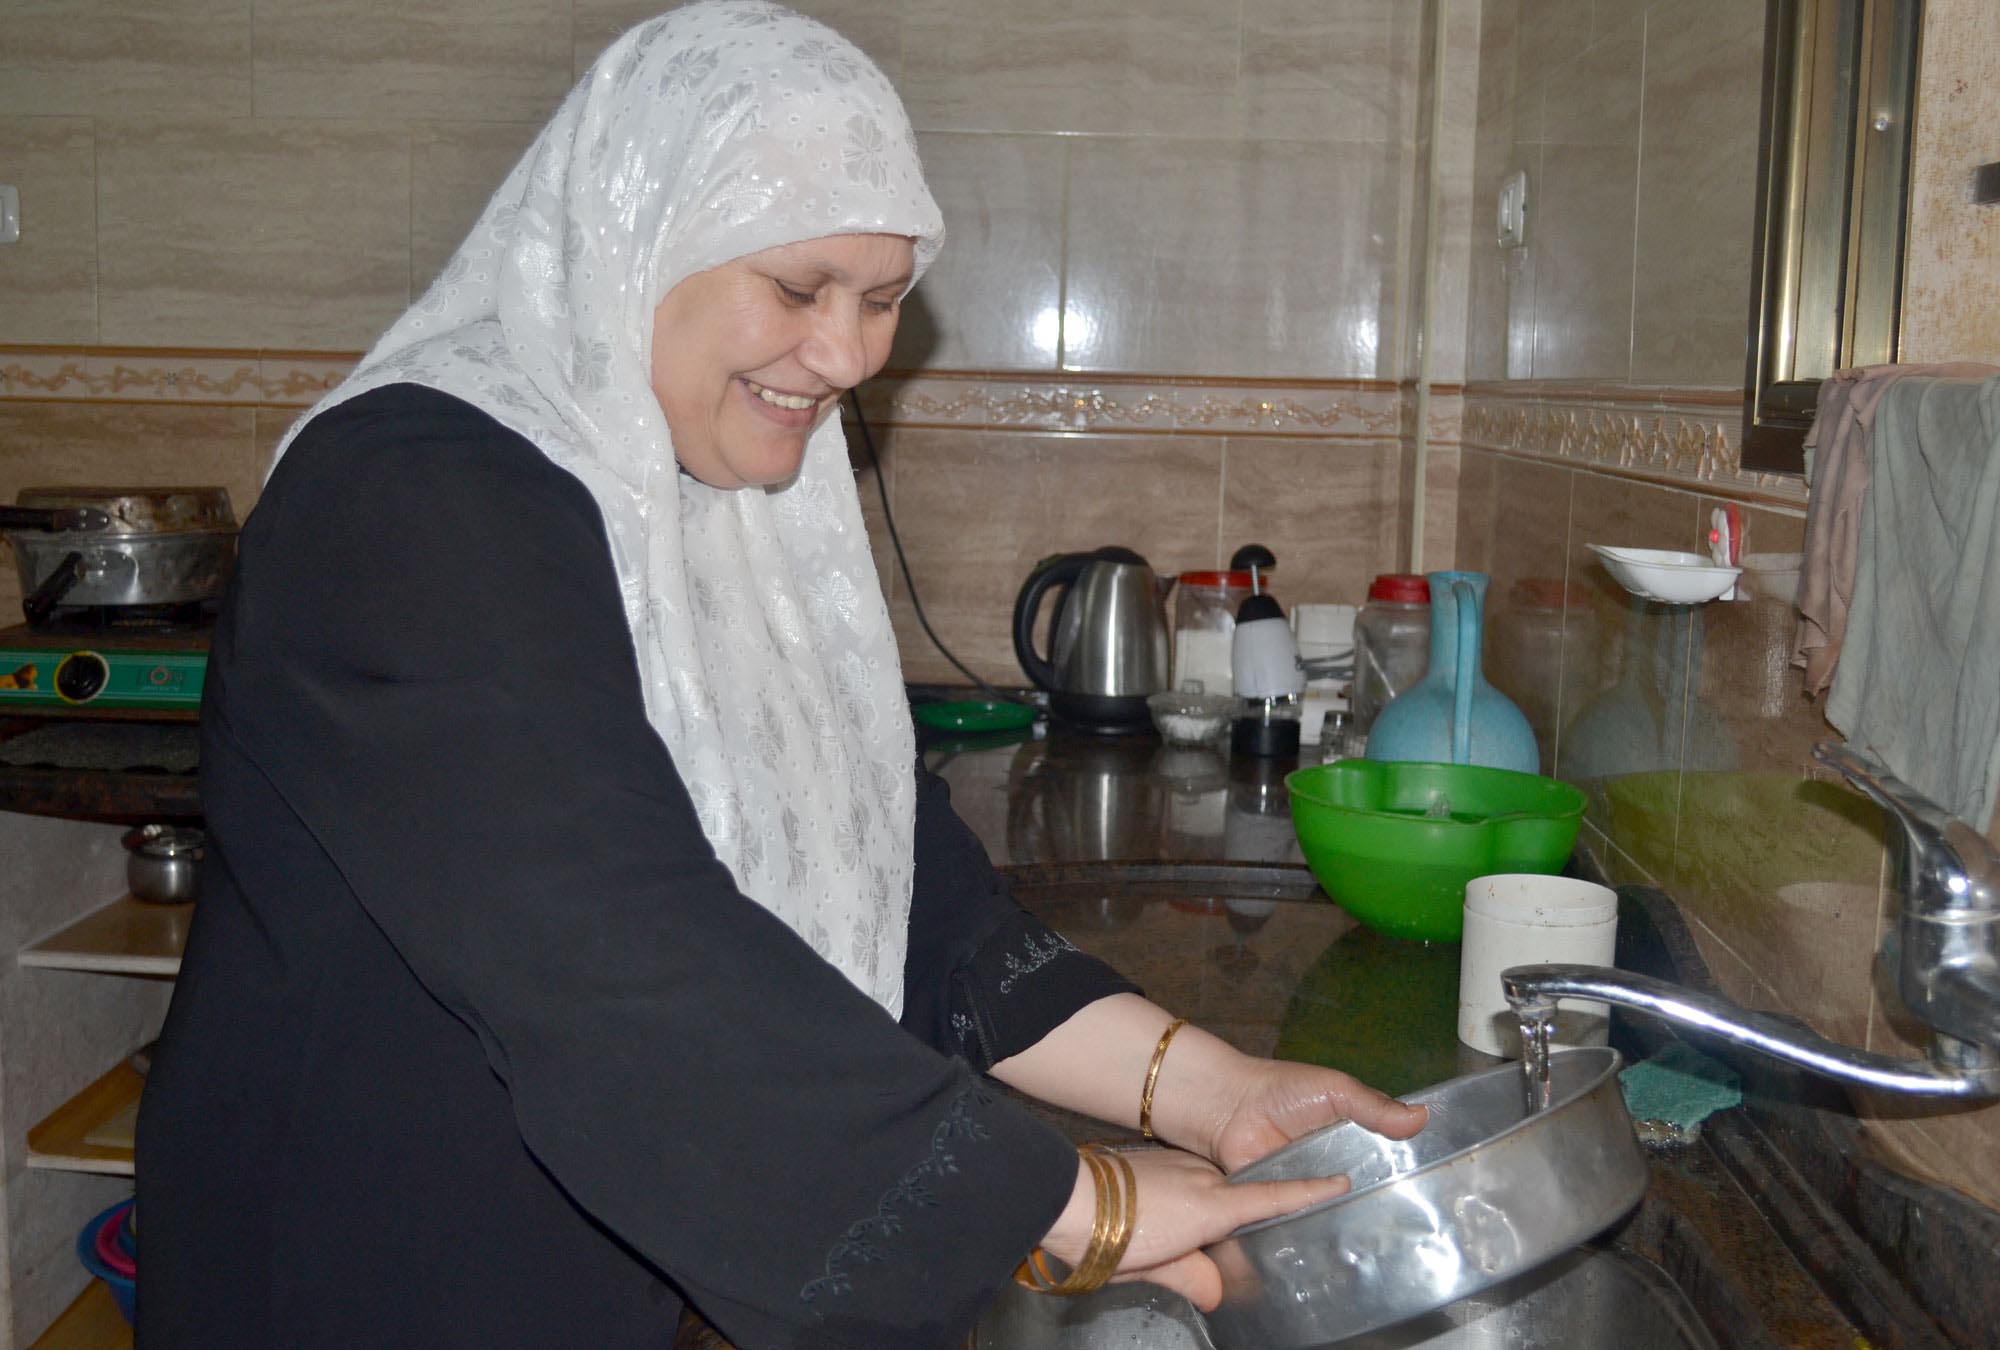 Iftikhaar at her kitchen sink. She says the improved water network Anera installed in her Gaza home makes it easier to cook and clean.